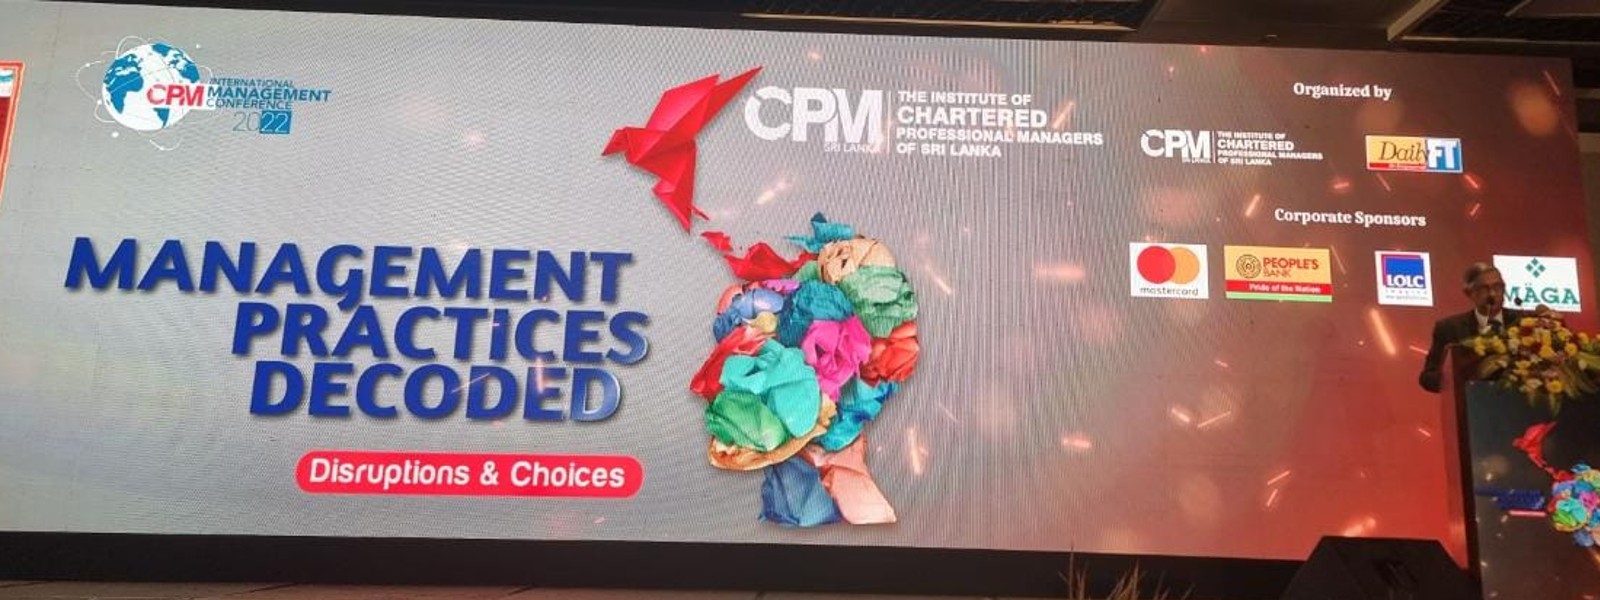 “Get the house in order” – Prof Lakshman Watawala, addressing CPM Conference.